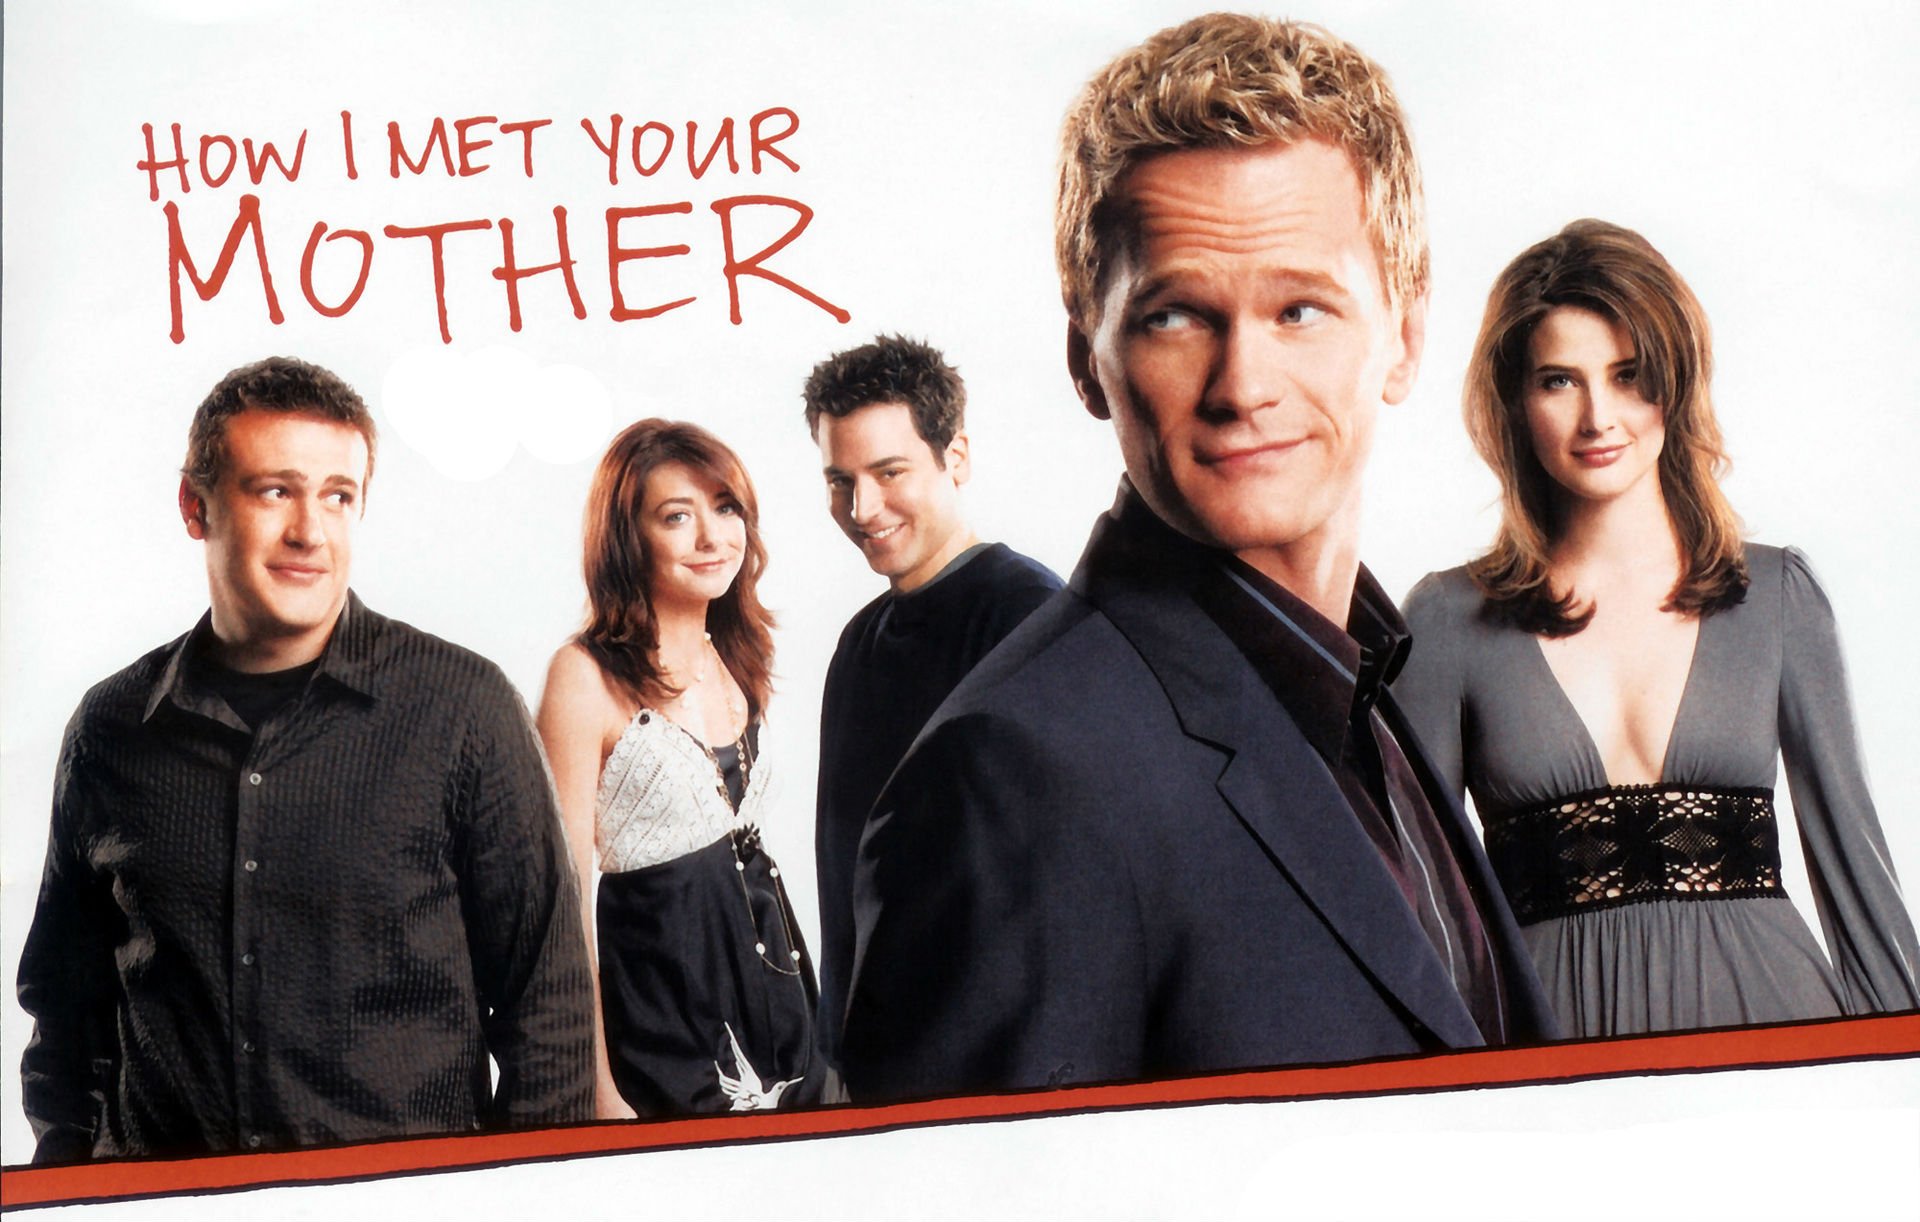 how i met your mother, Comedy, Sitcom, Series, Television, How, Met, Mother,  20 Wallpaper